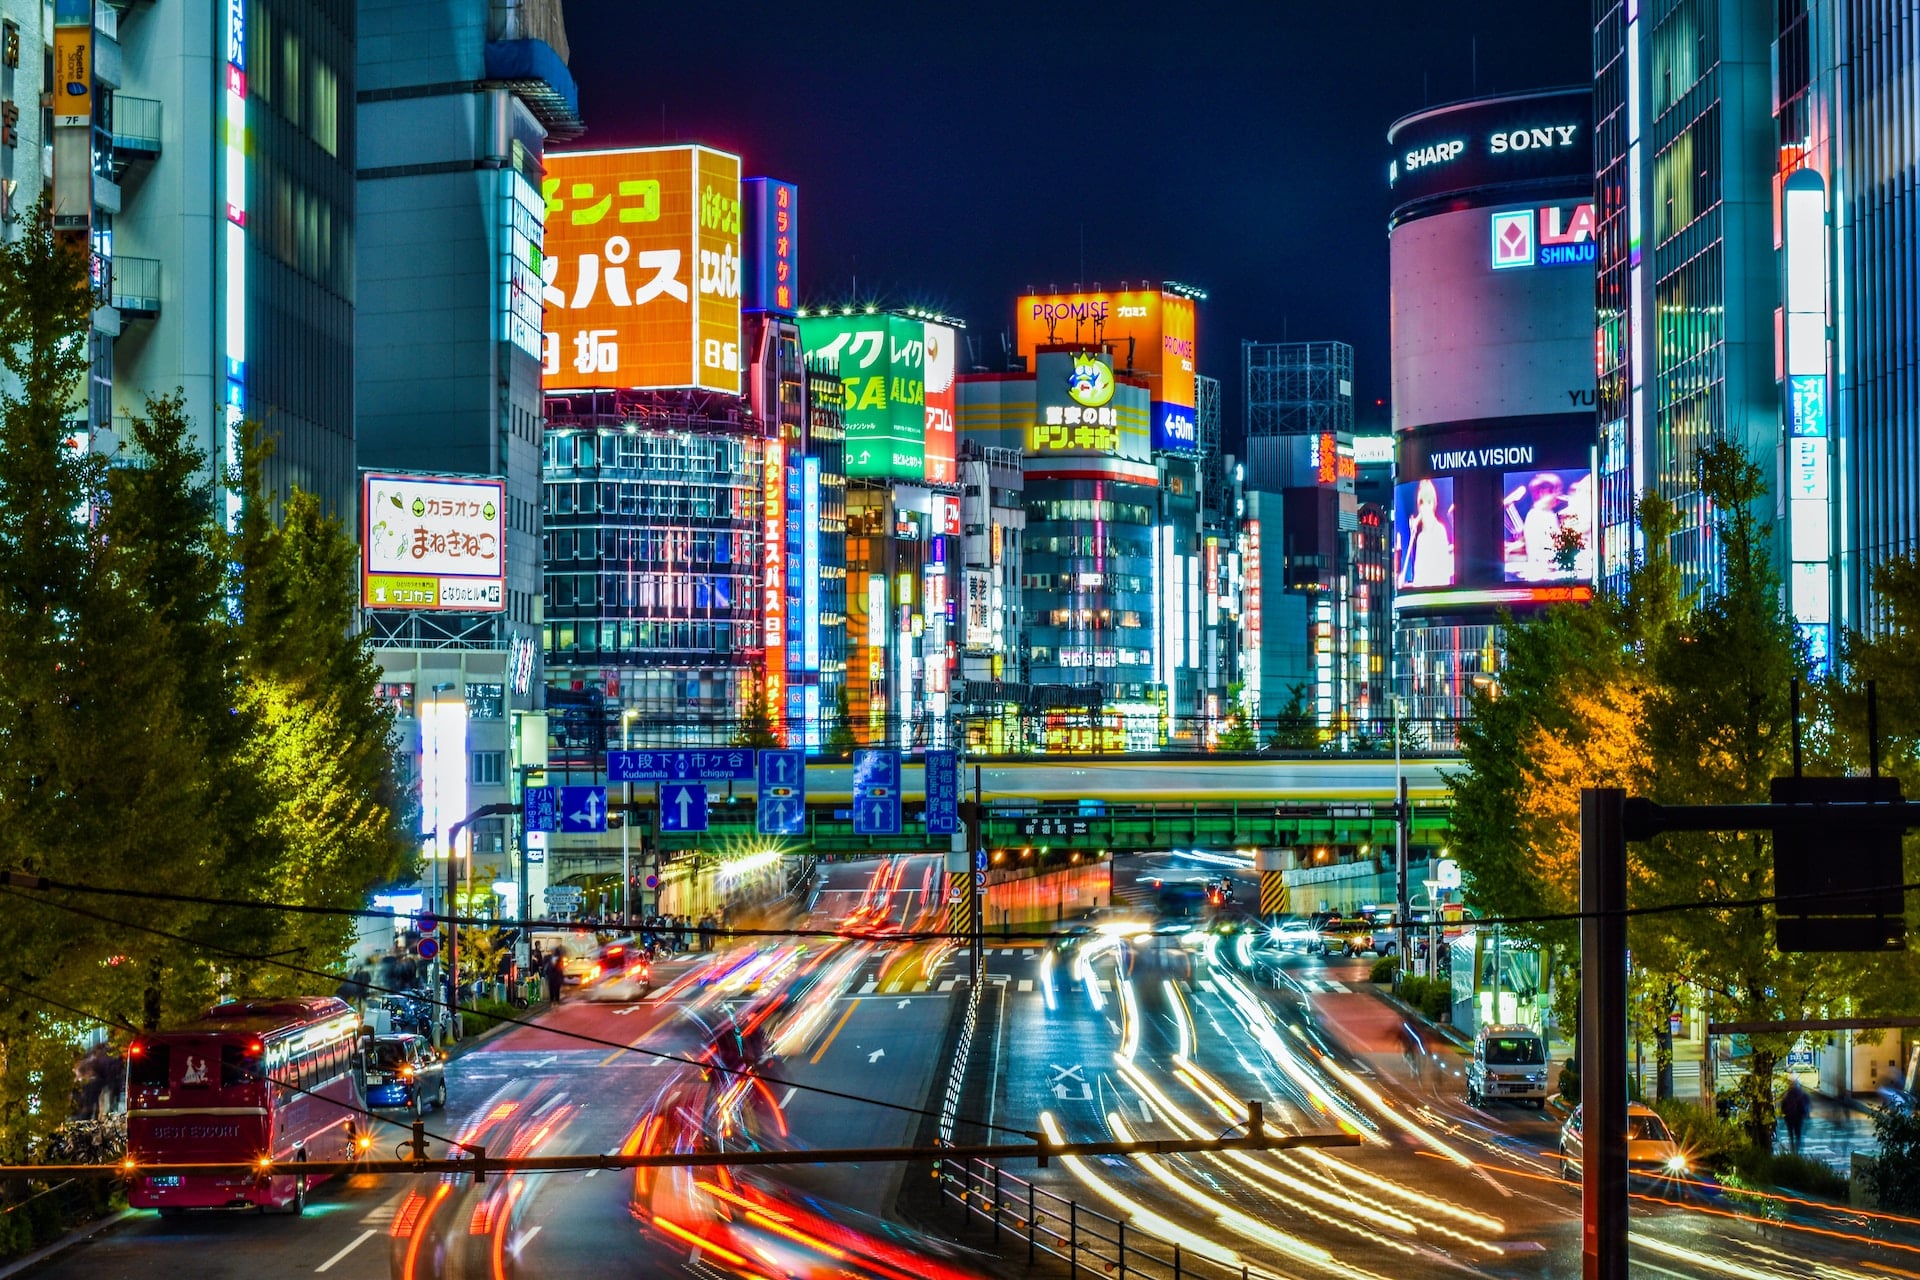 Shinjuku Ward is located in the western part of central Tokyo and is known for its vibrant nightlife and shopping areas